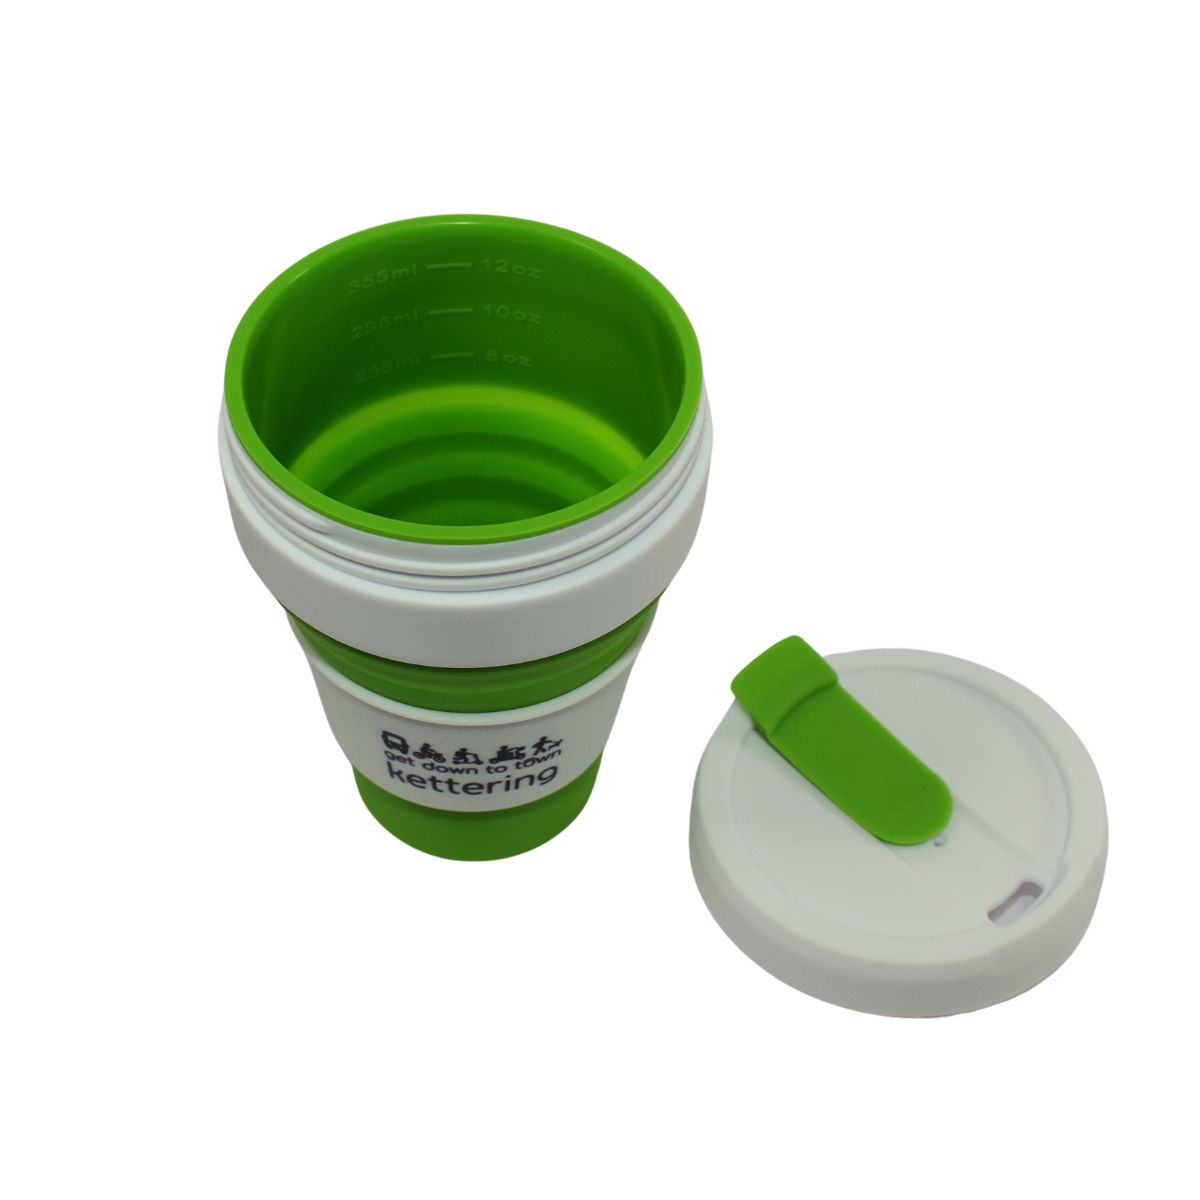 Collapsible Cup, with lid off showing measurements in millilitre and fluid ounces